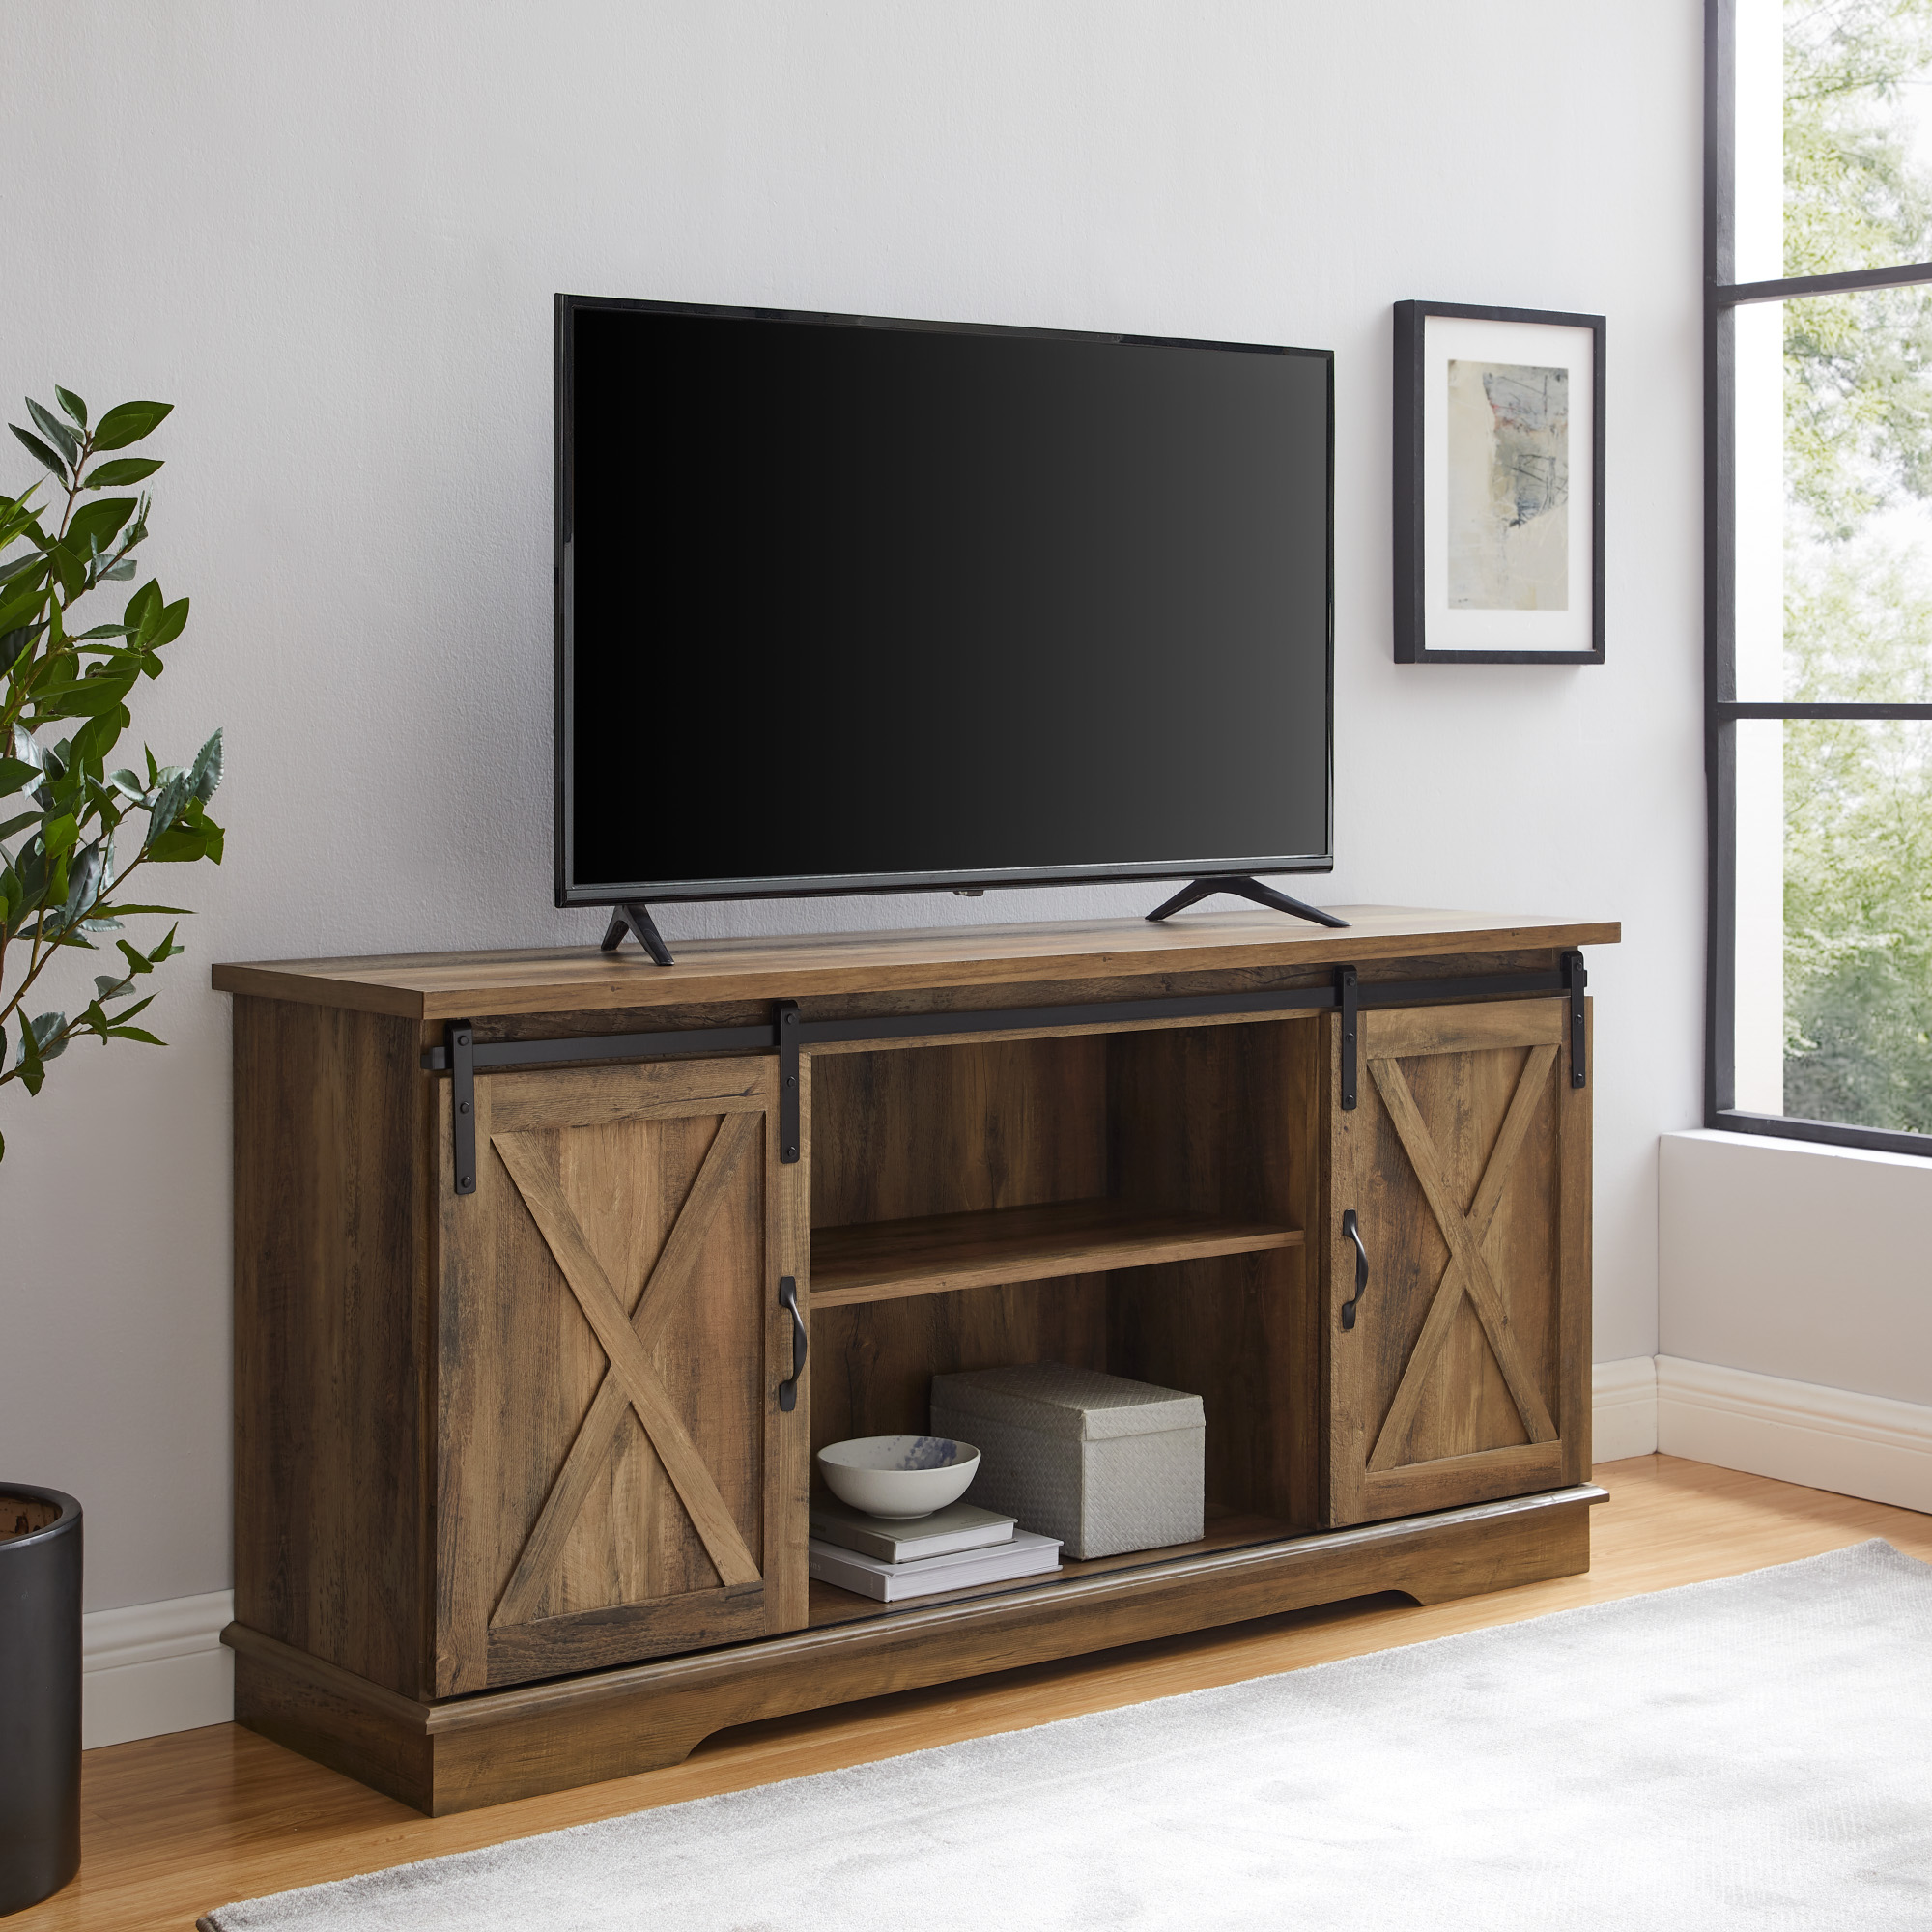 Woven Paths Sliding Farmhouse Barn Door TV Stand for TVs up to 65", Reclaimed Barnwood - image 1 of 11